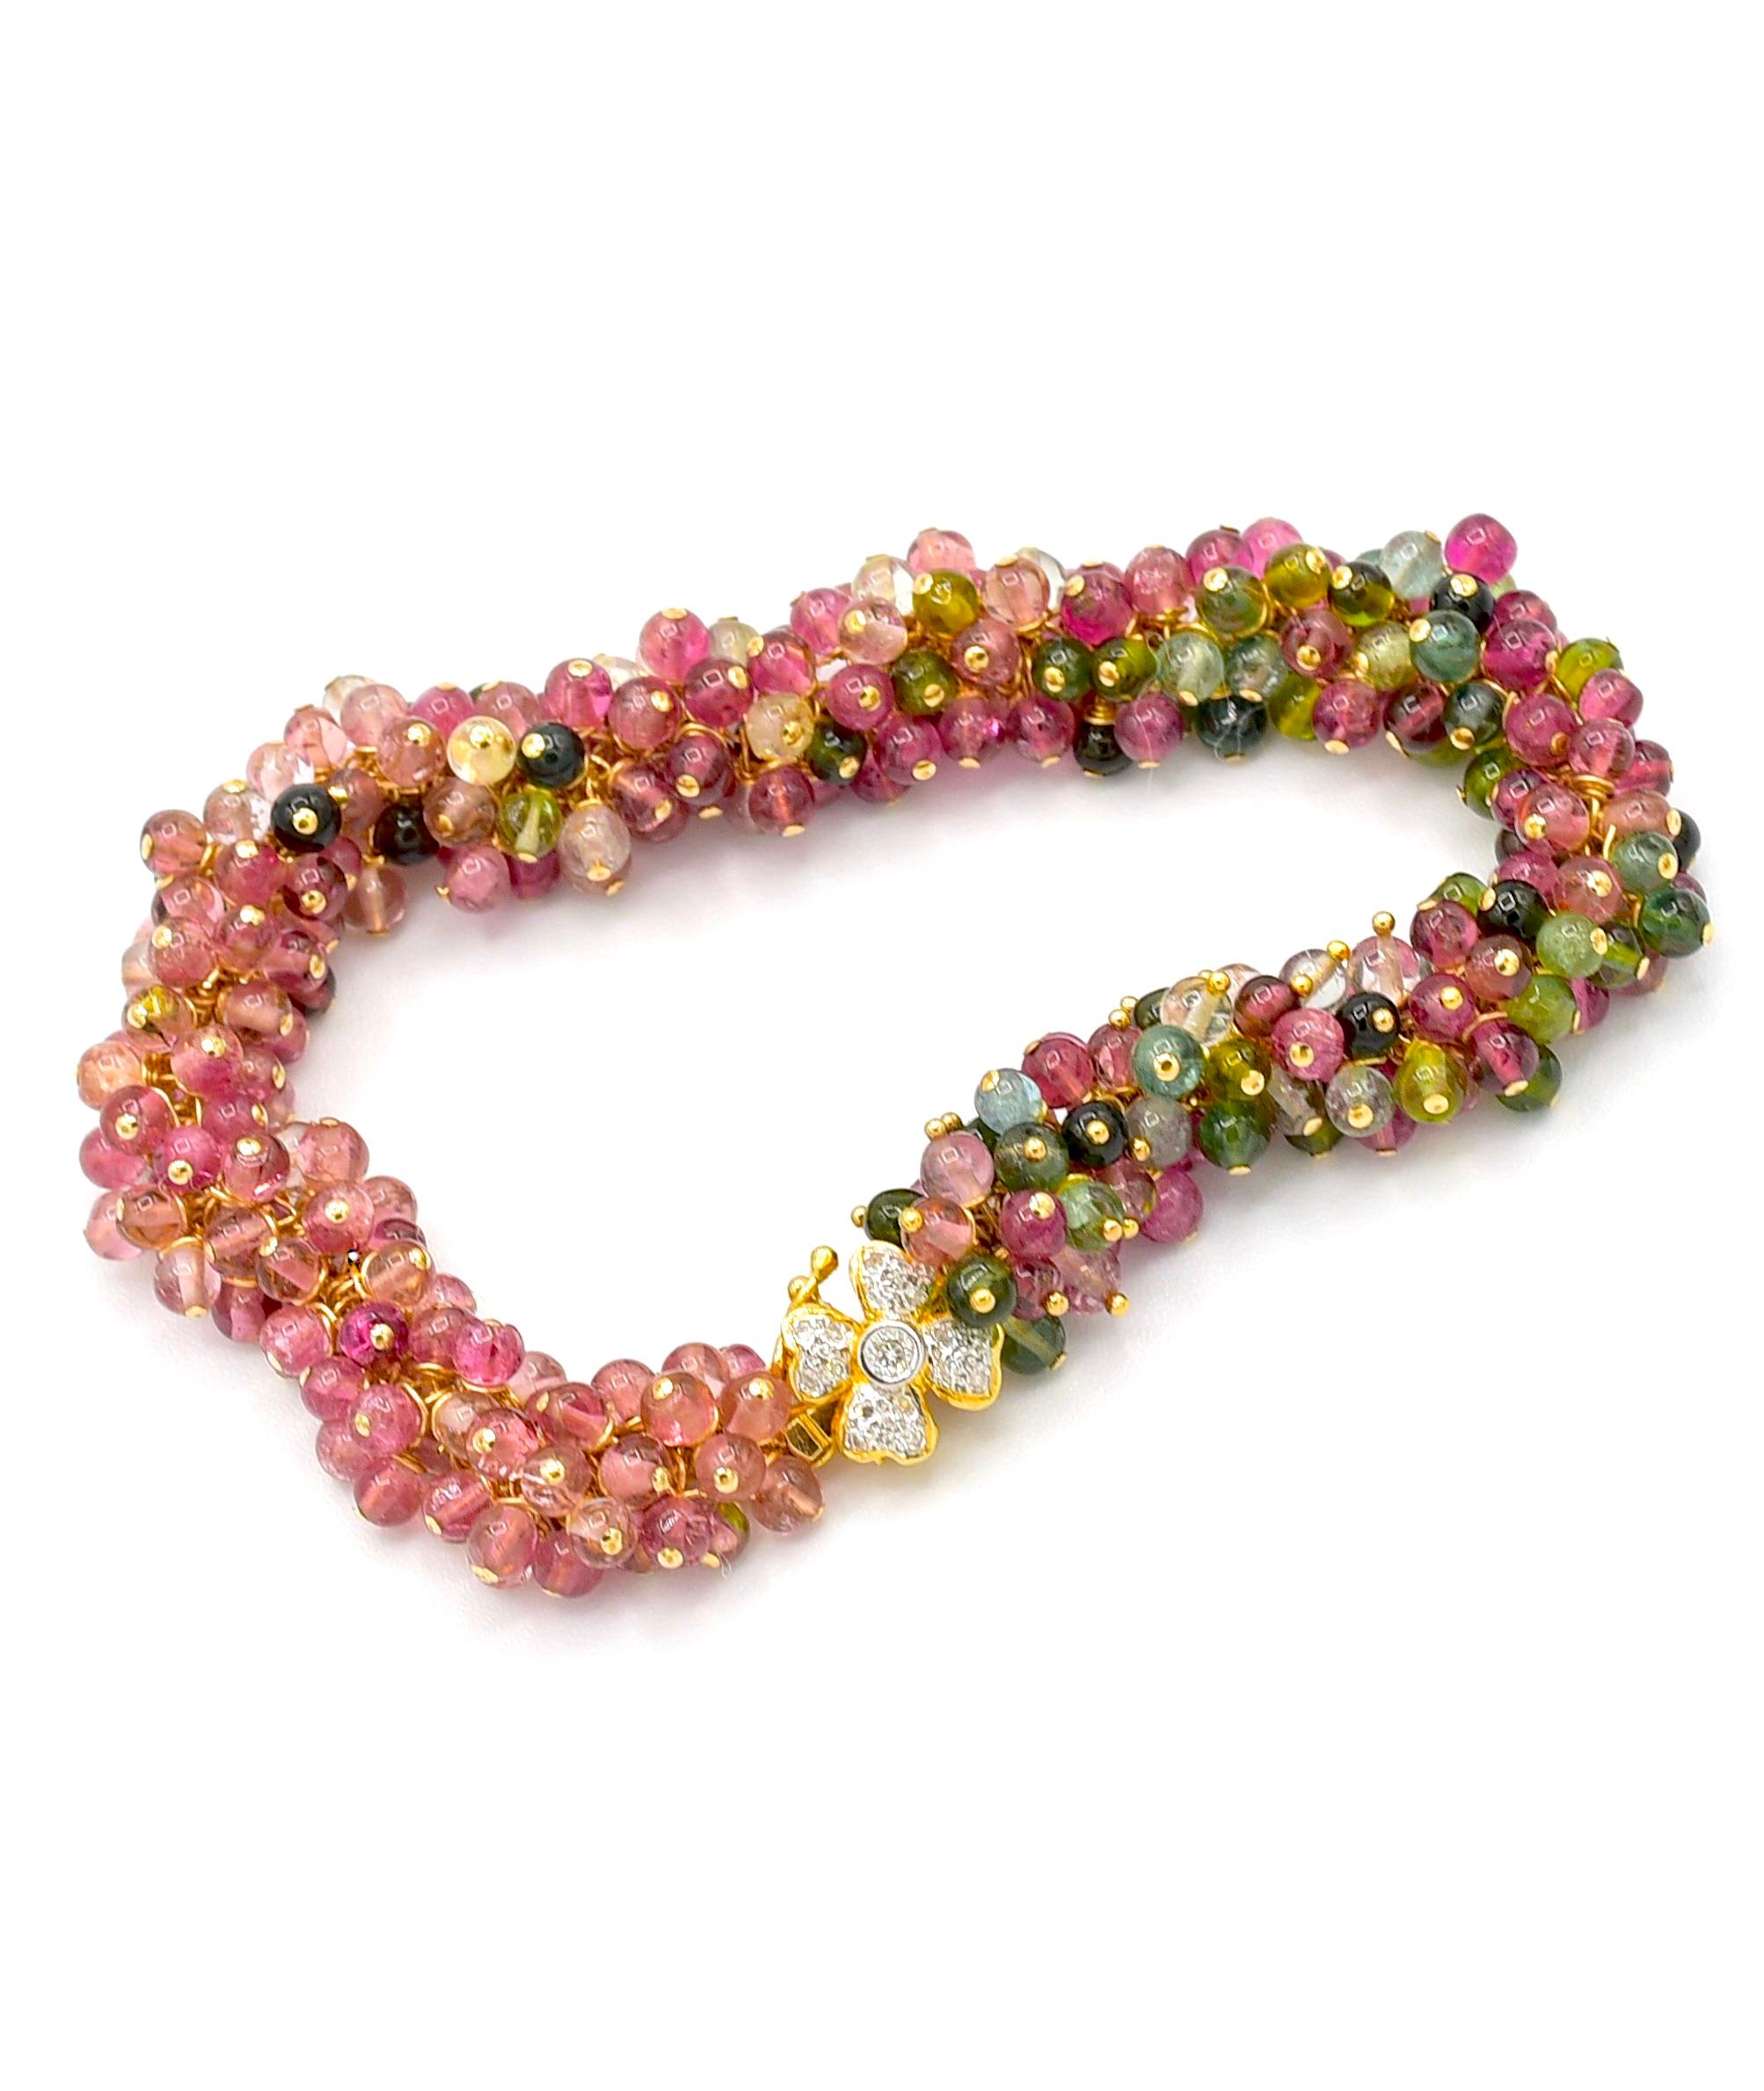 Women's Tourmaline Beads with 14K Solid Yellow Gold Diamond Floral Clasp Bracelet